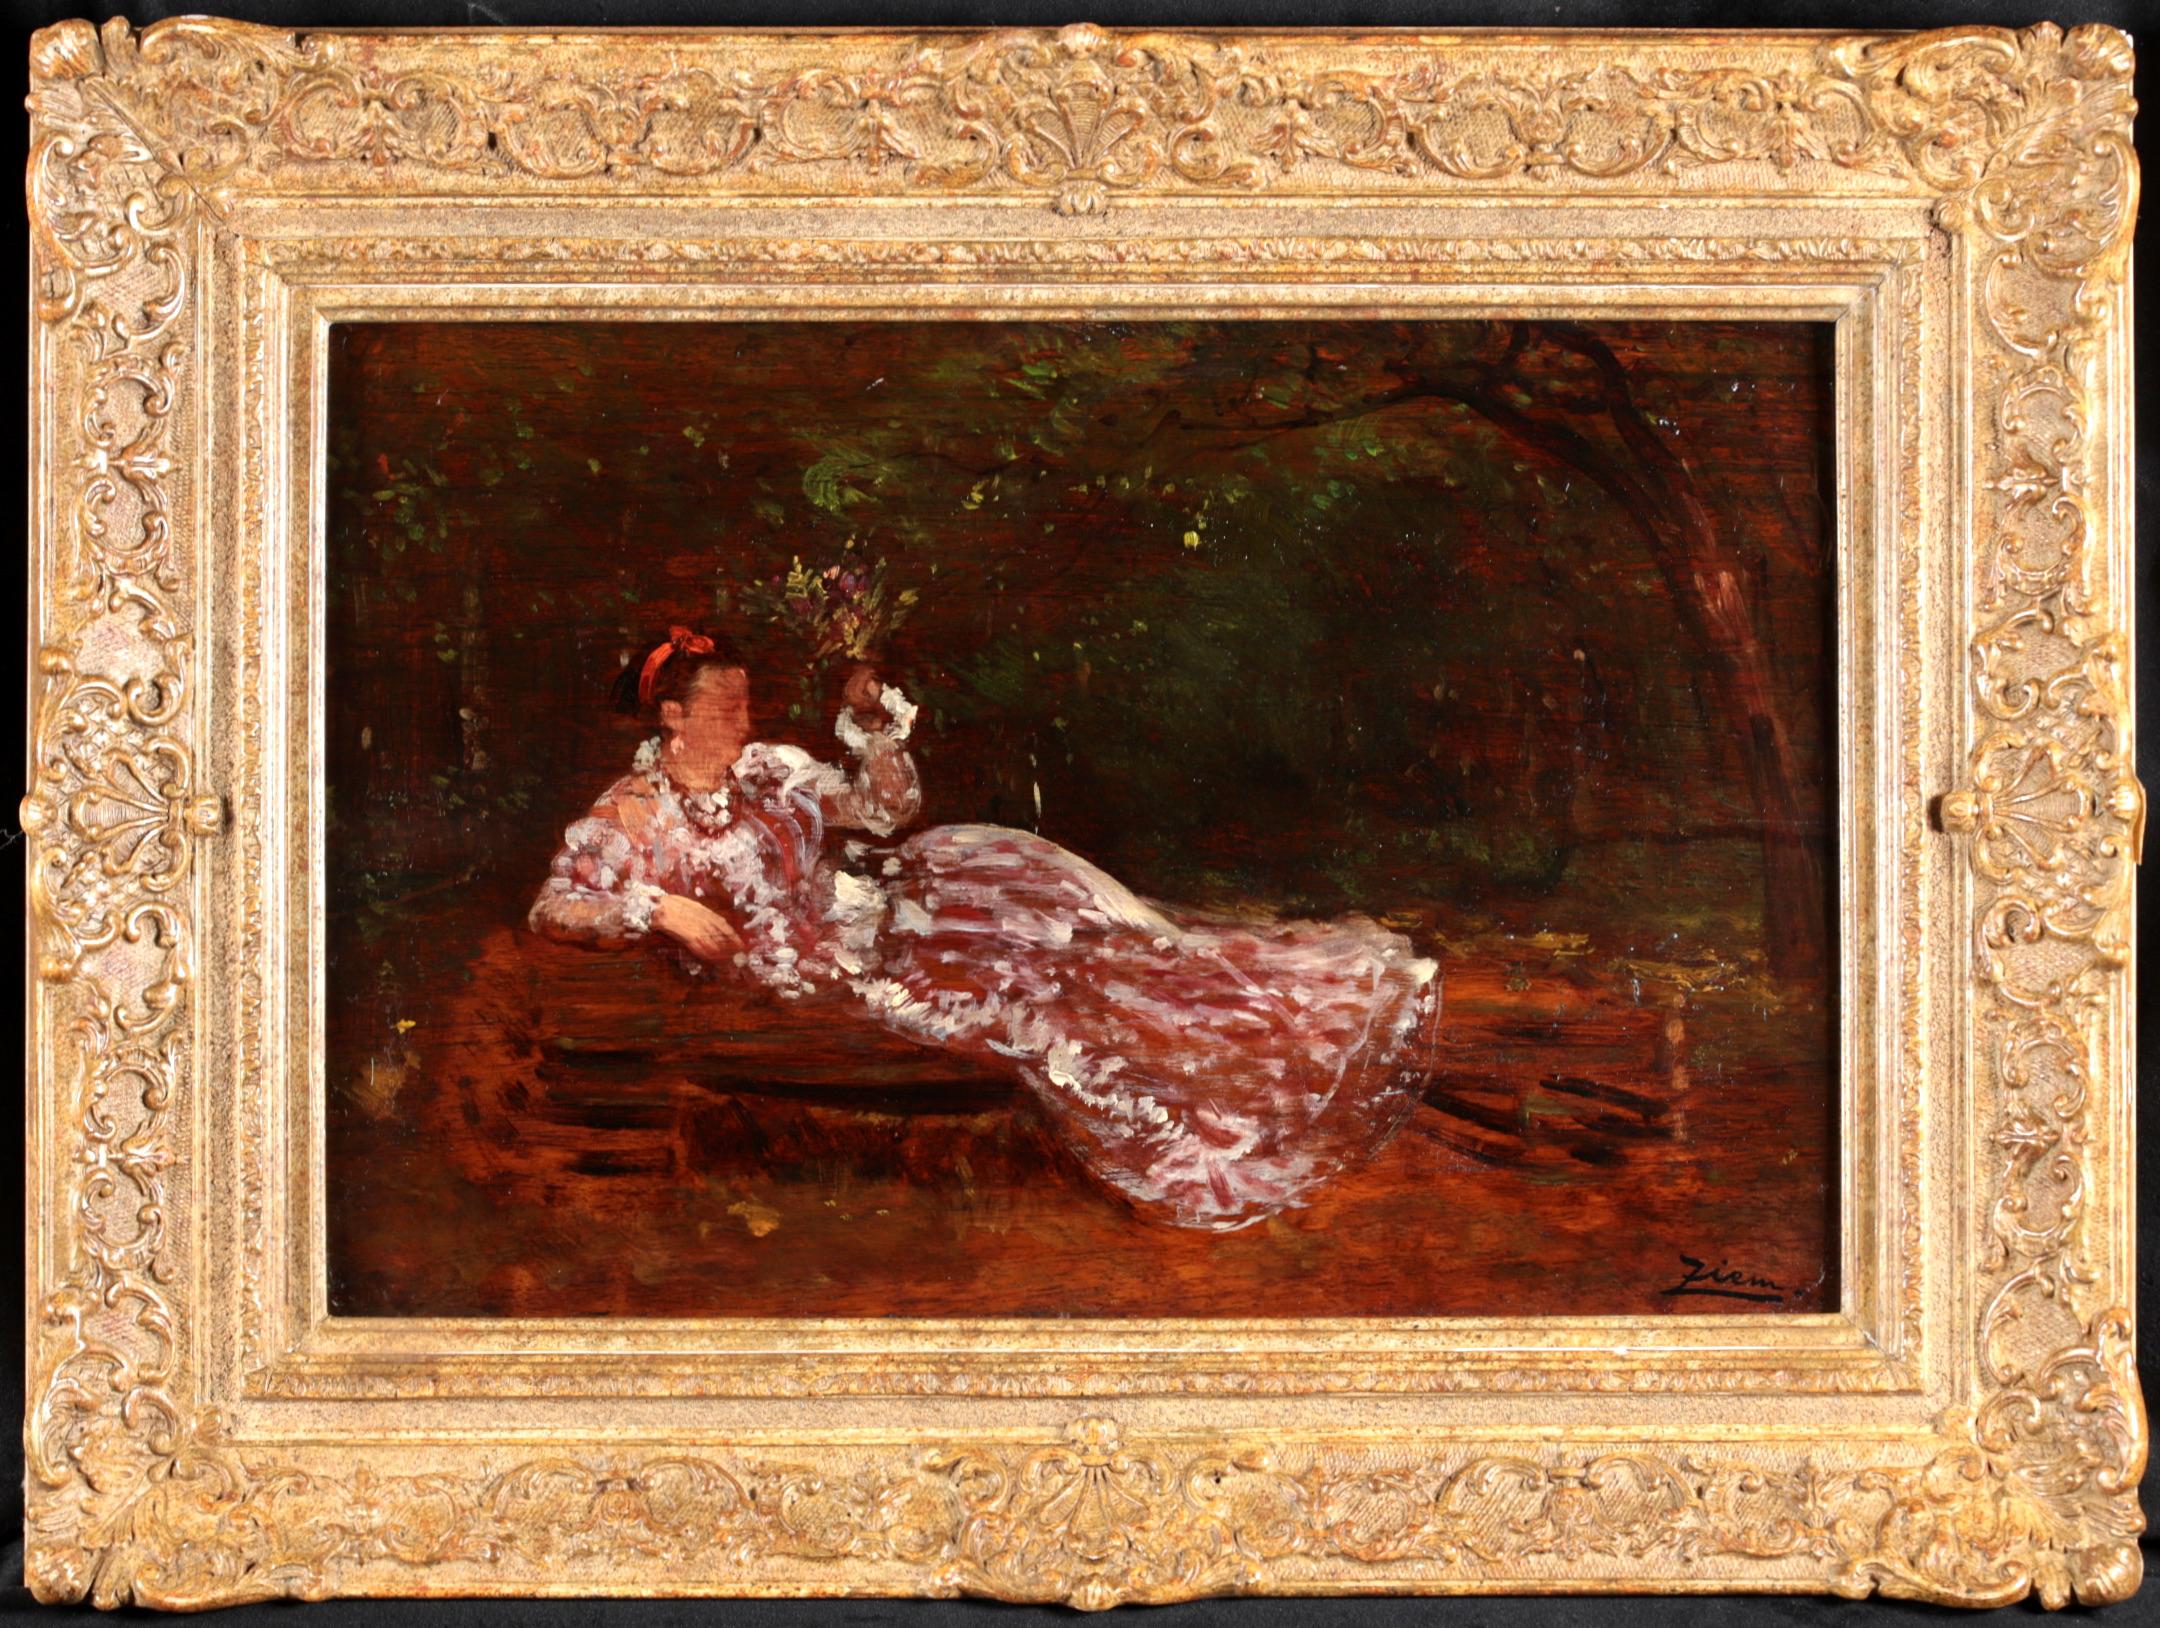 Signed figurative impressionist oil on canvas circa 1860 by French painter Felix Francois Georges Philbert Ziem. The piece depicts a young woman wearing a red and white dress with a red bow in her hair. She is resting on a felled tree in a forest